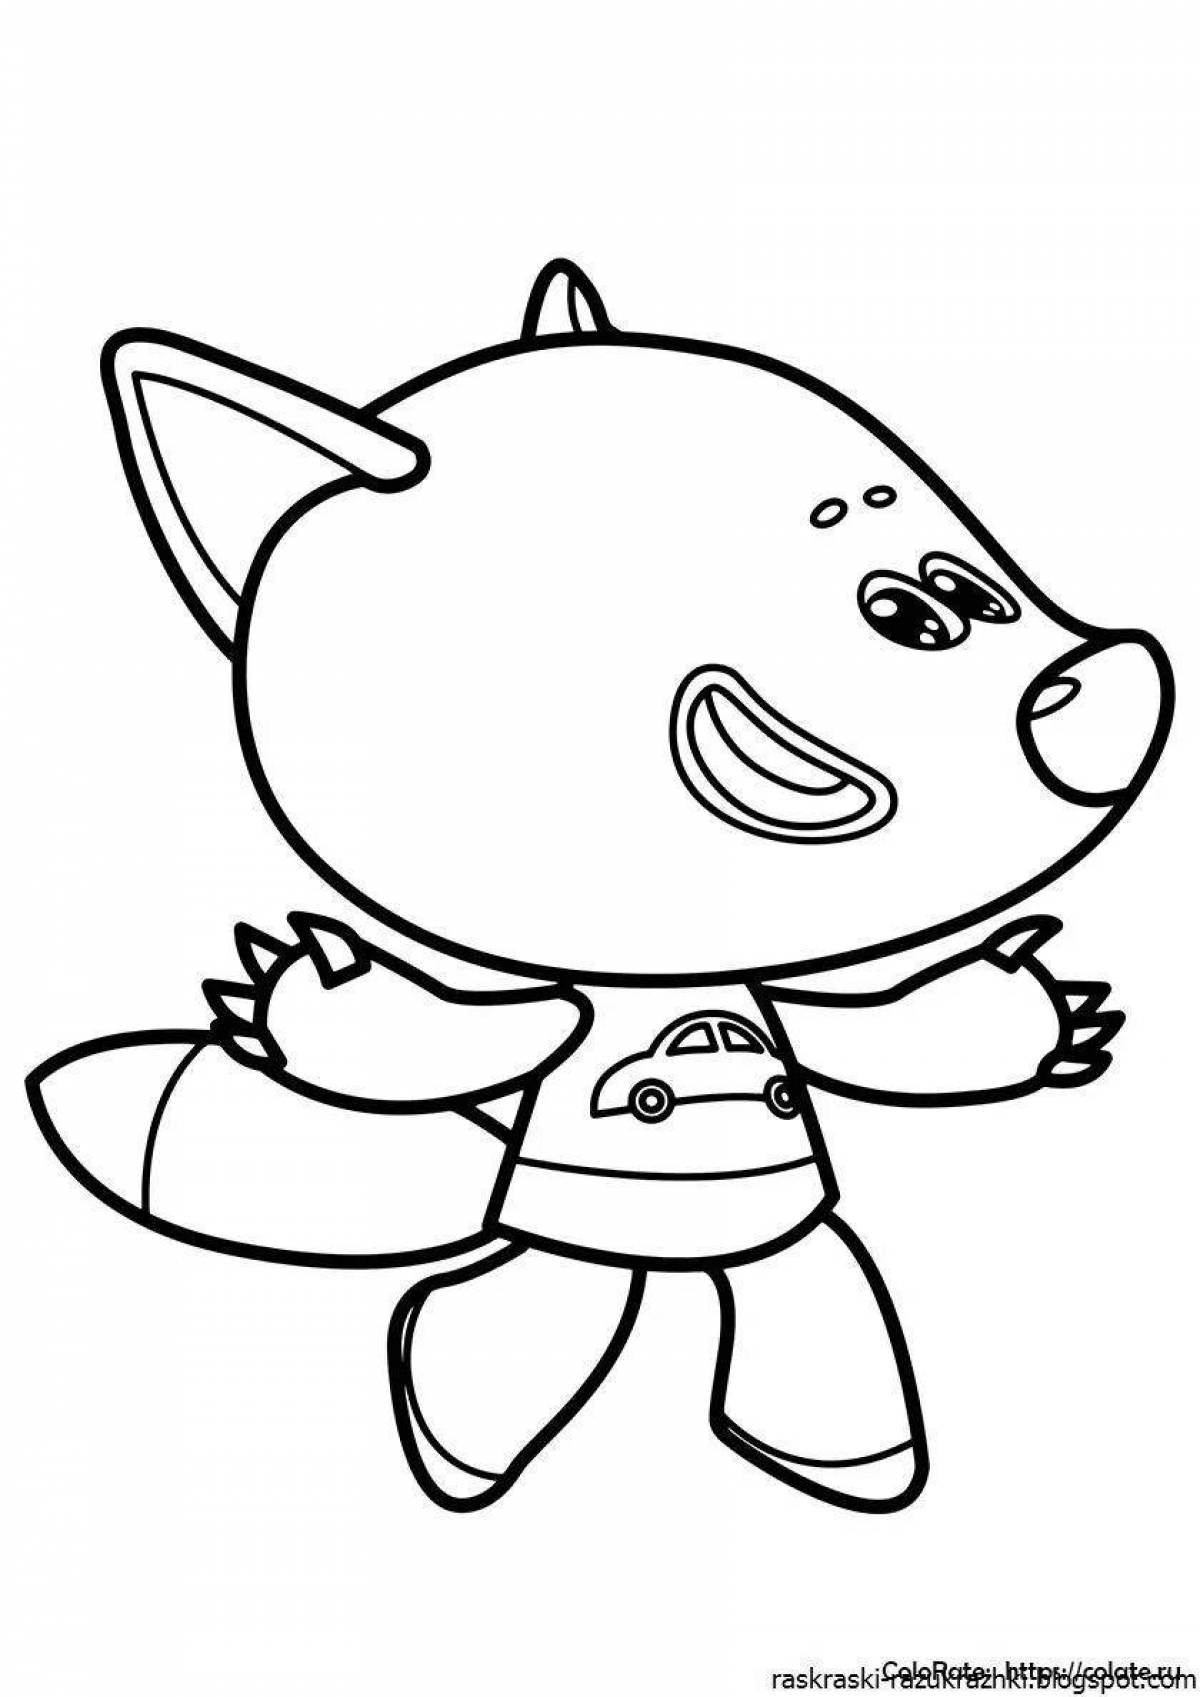 Playful little bears coloring pages for kids